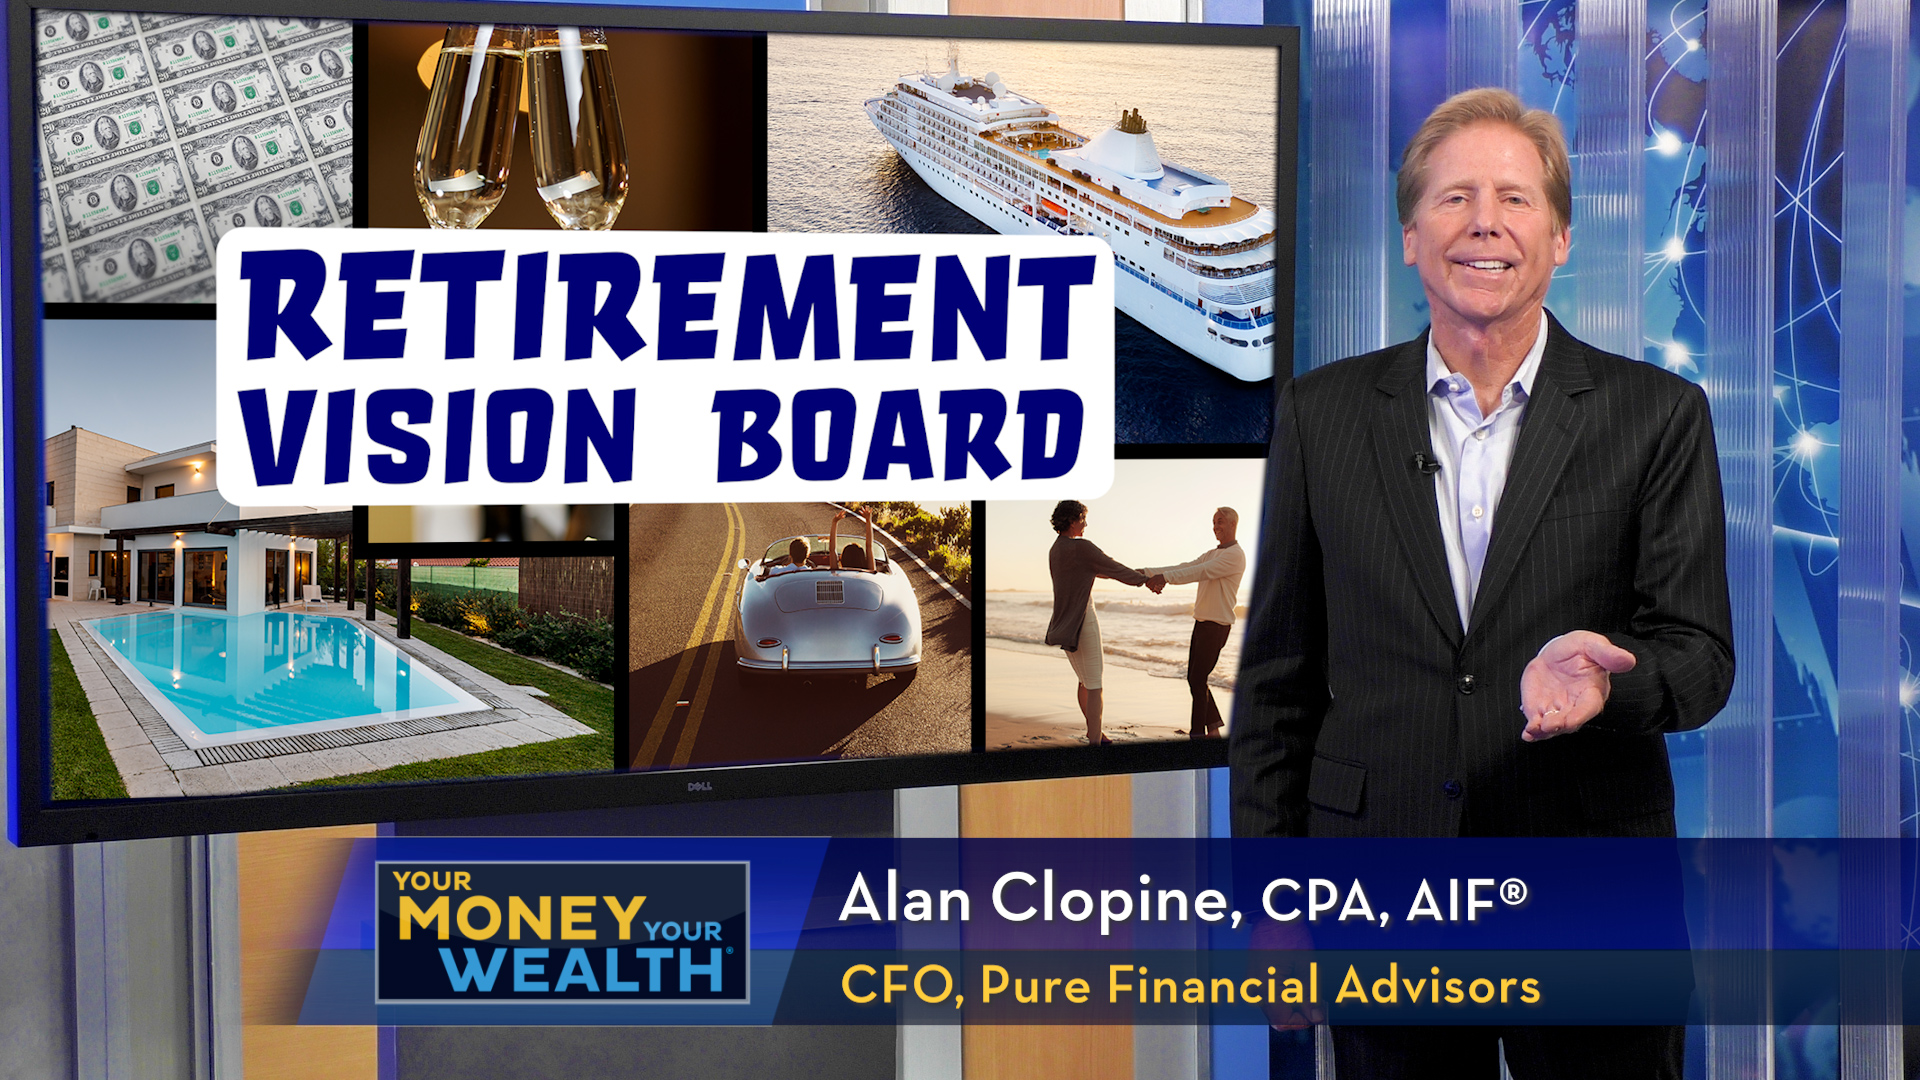 Retirement Vision Board: How to Plan for Your Financial Future